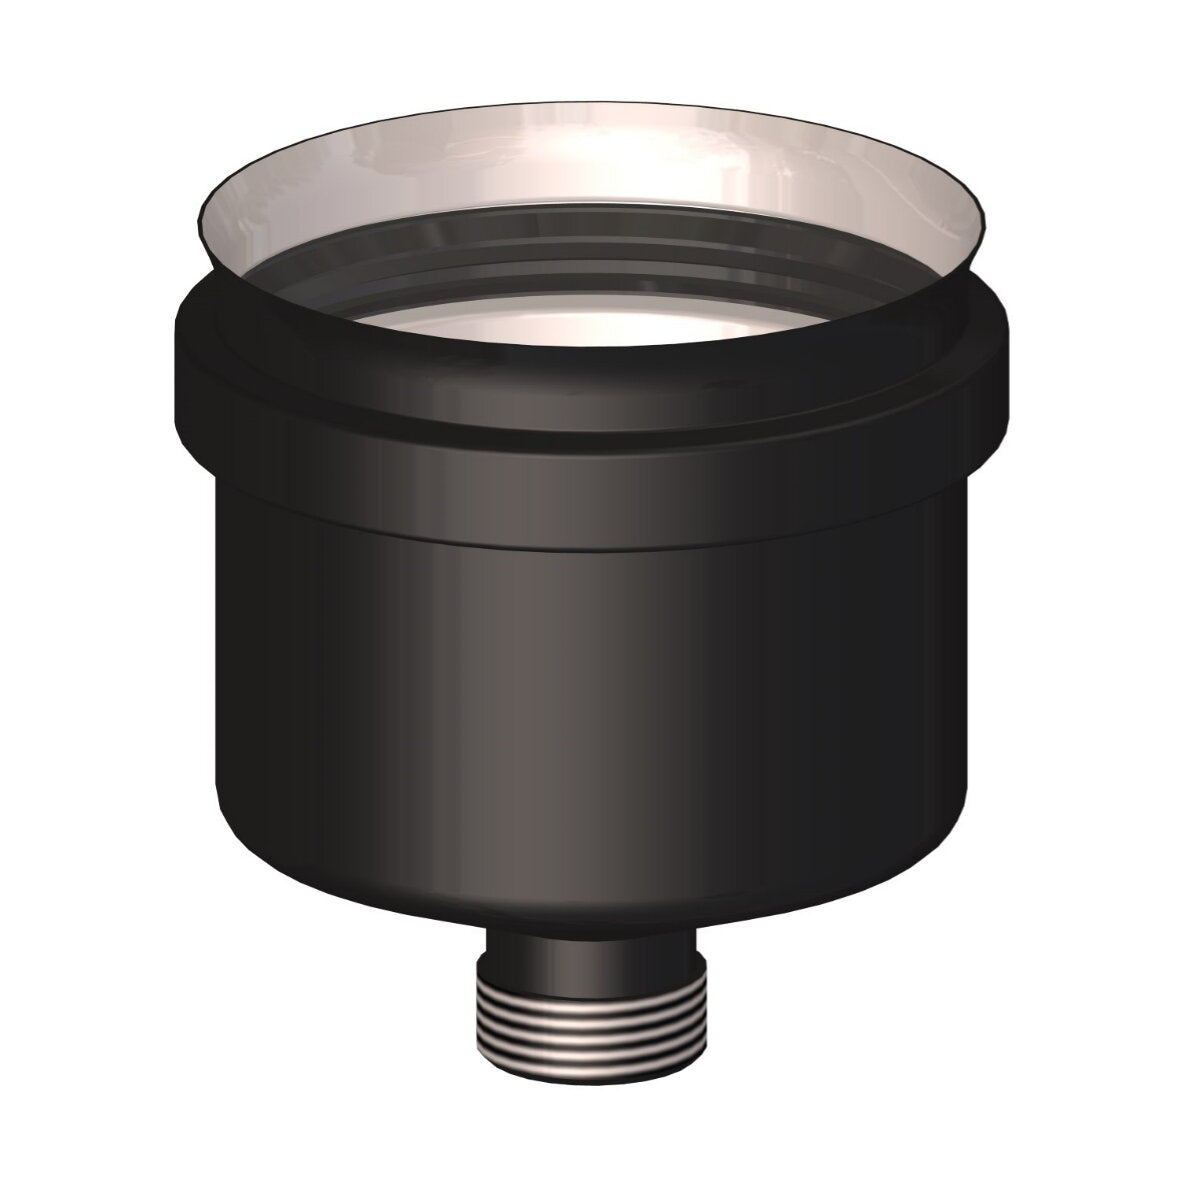 Condensate drain plug diam. 80 mm for pellet stove and pellet boiler fumes outlet